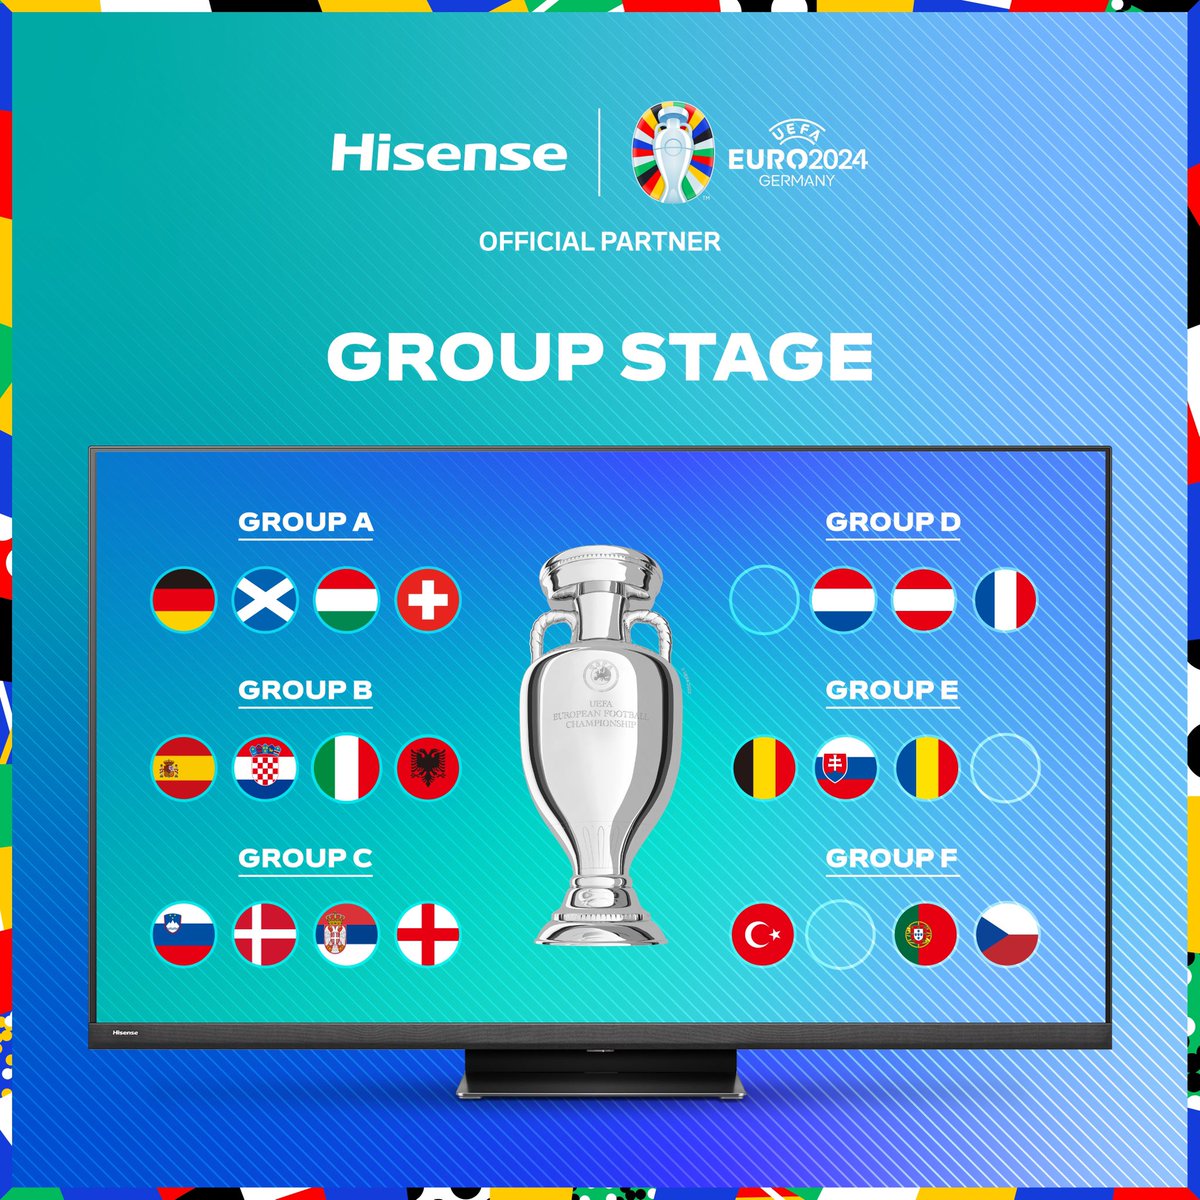 Here are your official groups for next summers UEFA EURO 2024ᵀᴹ  tournament #EURO2024! #HisenseEURO2024Challenge #EURO2024officialdraw